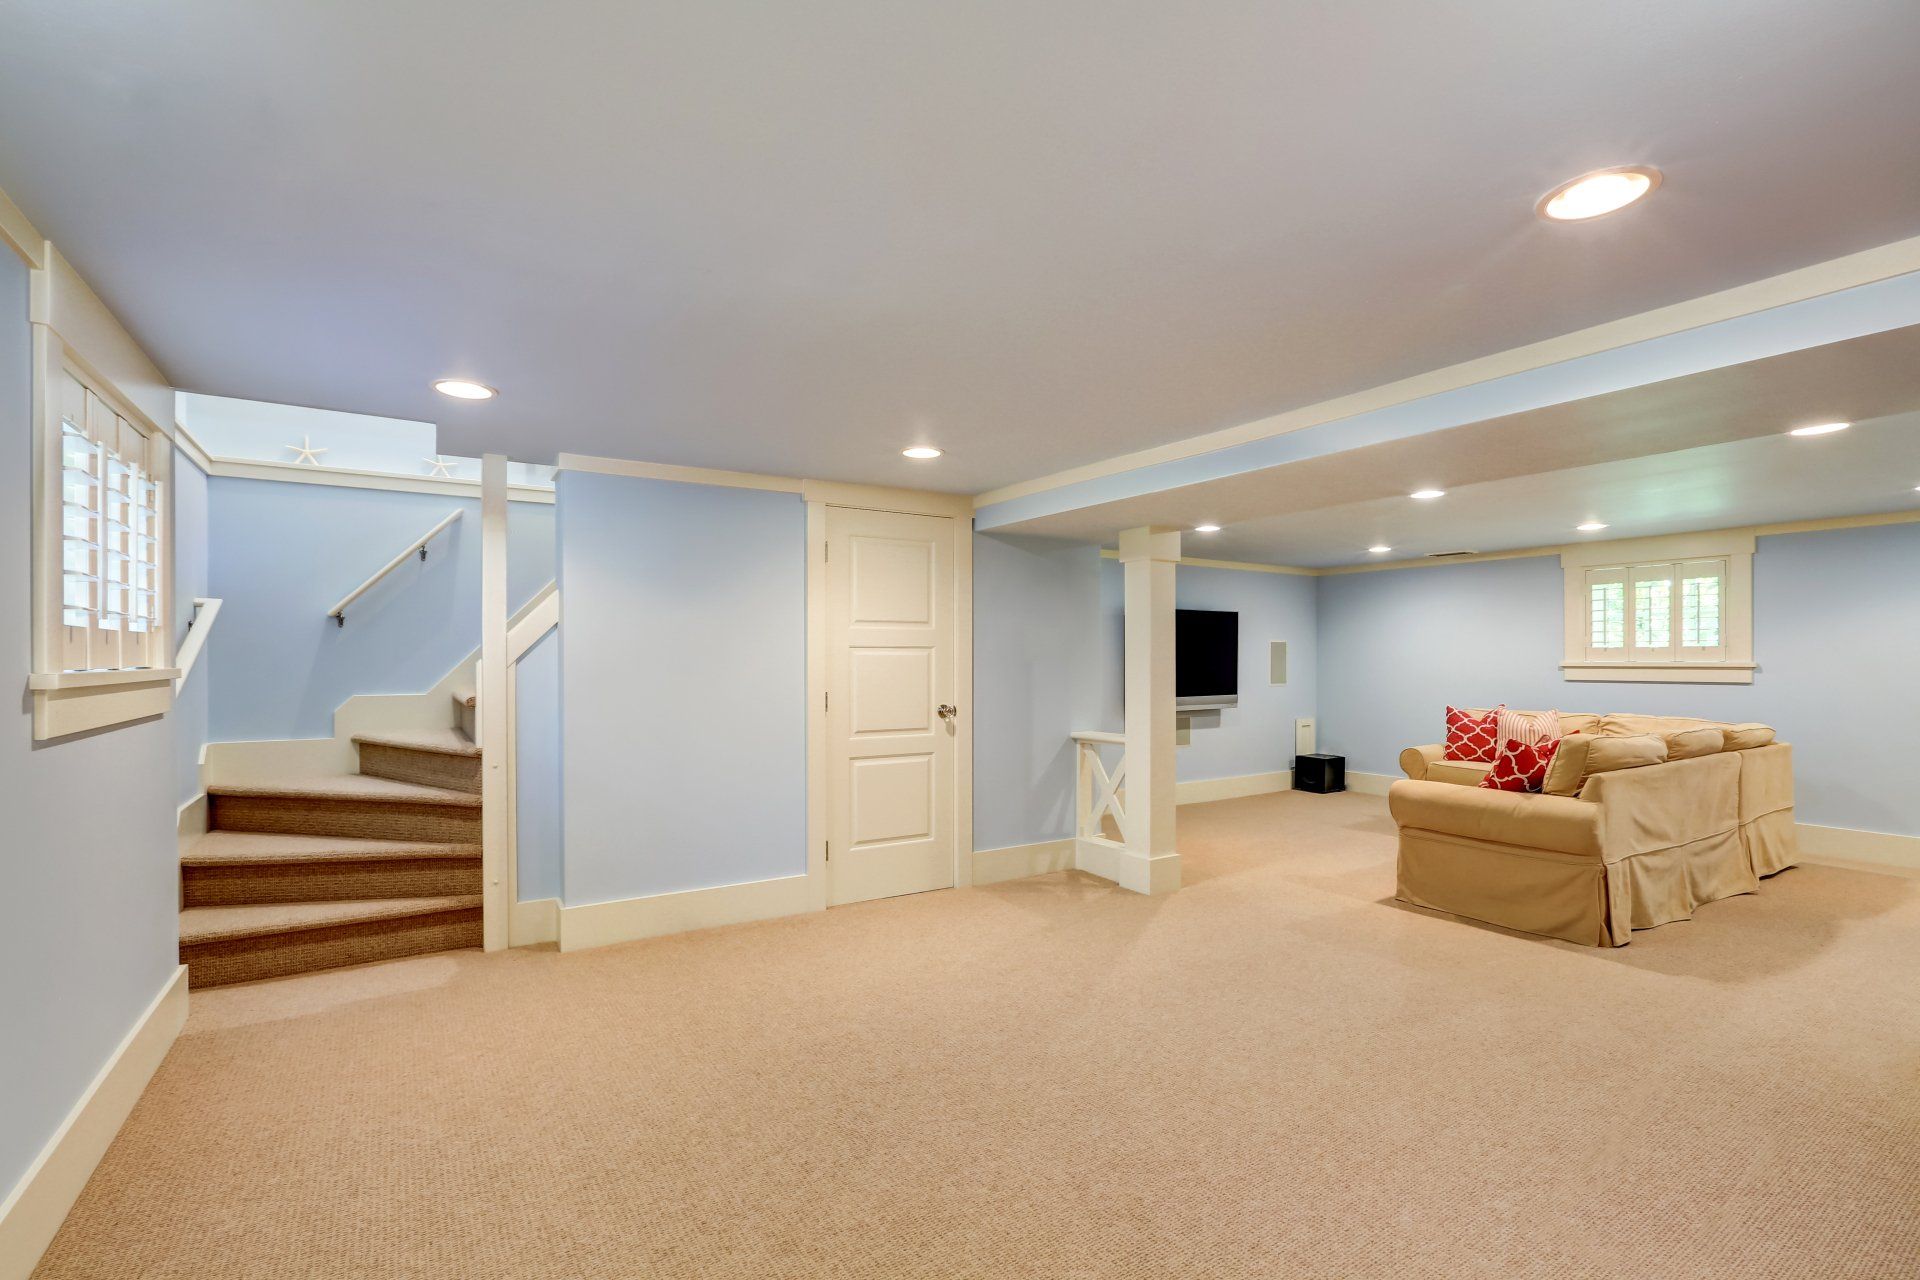 Spacious Remodeled Basement in Downingtown, PA